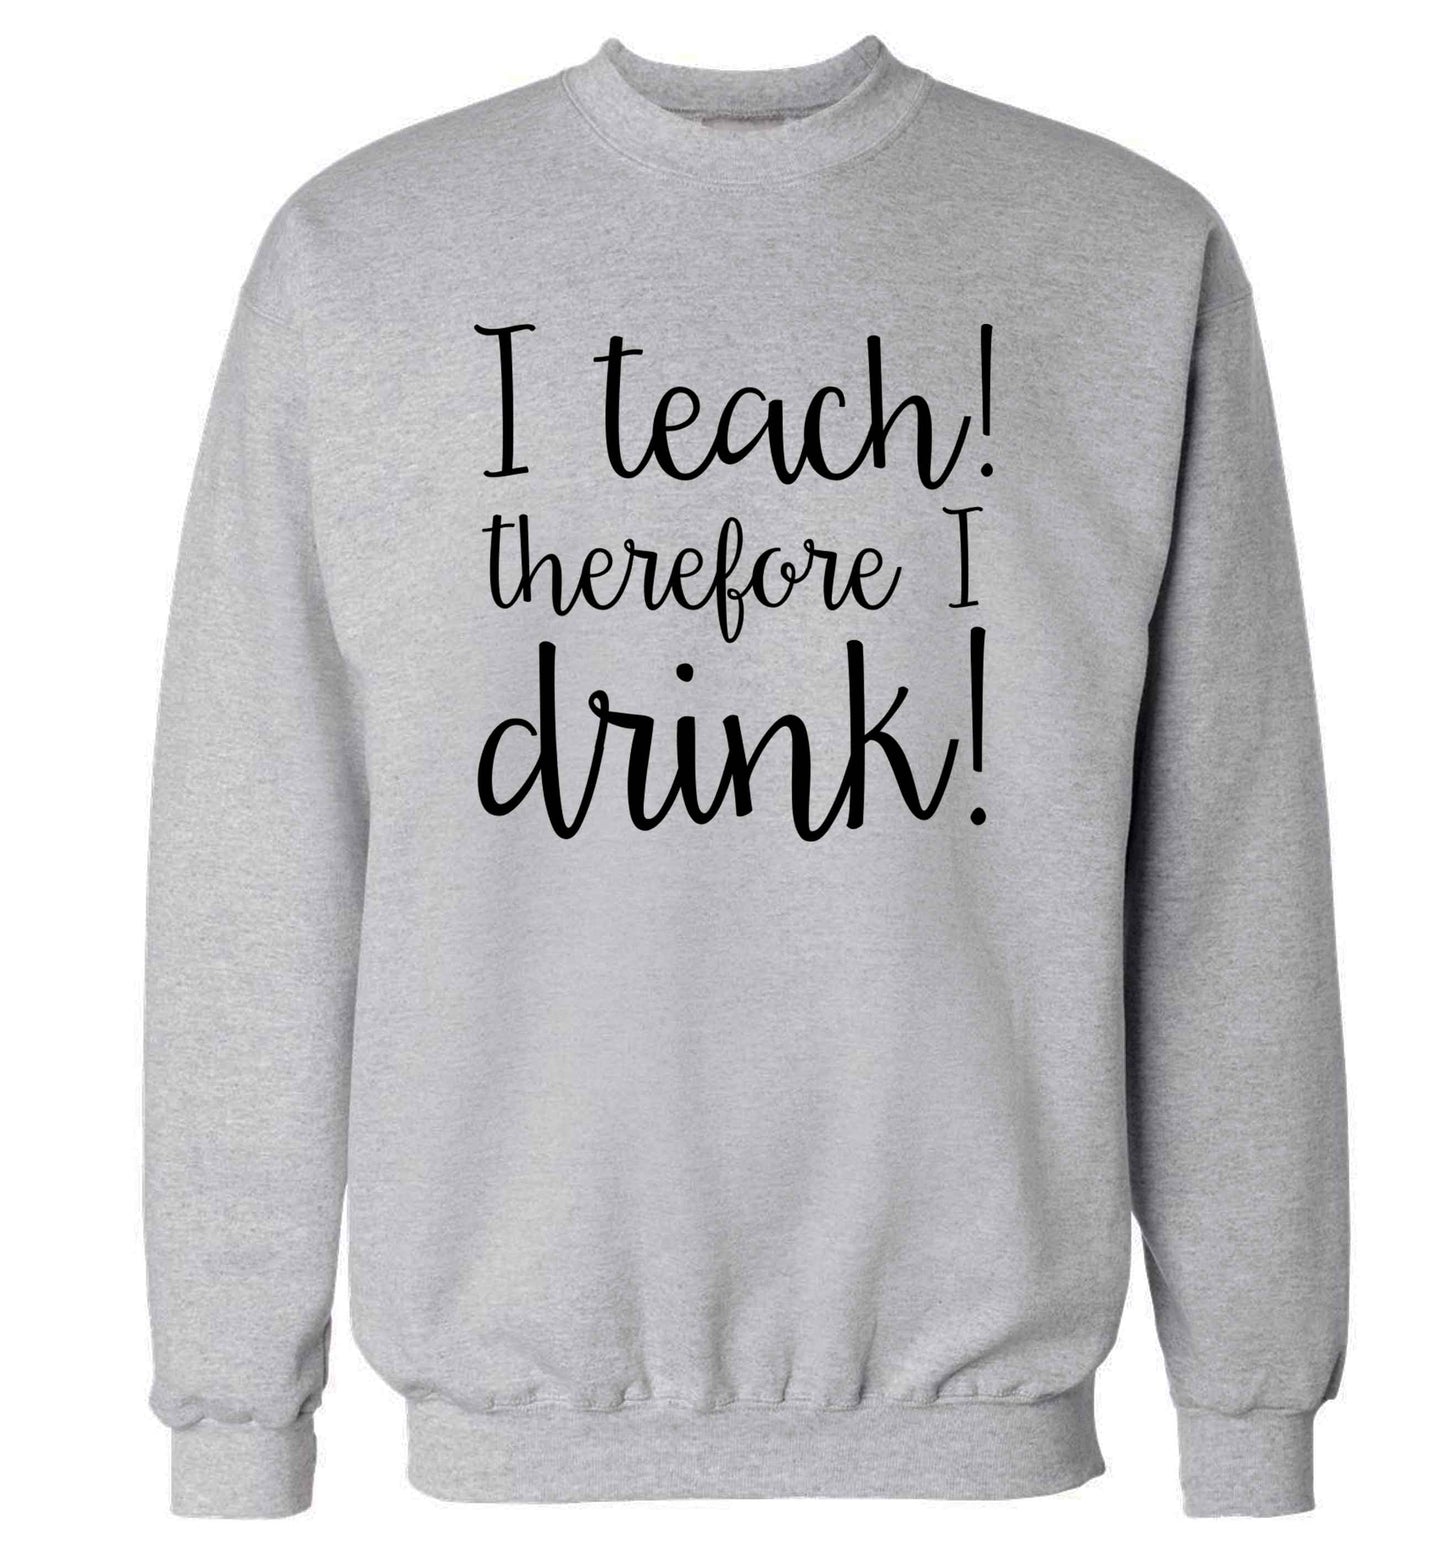 I teach therefore I drink adult's unisex grey sweater 2XL